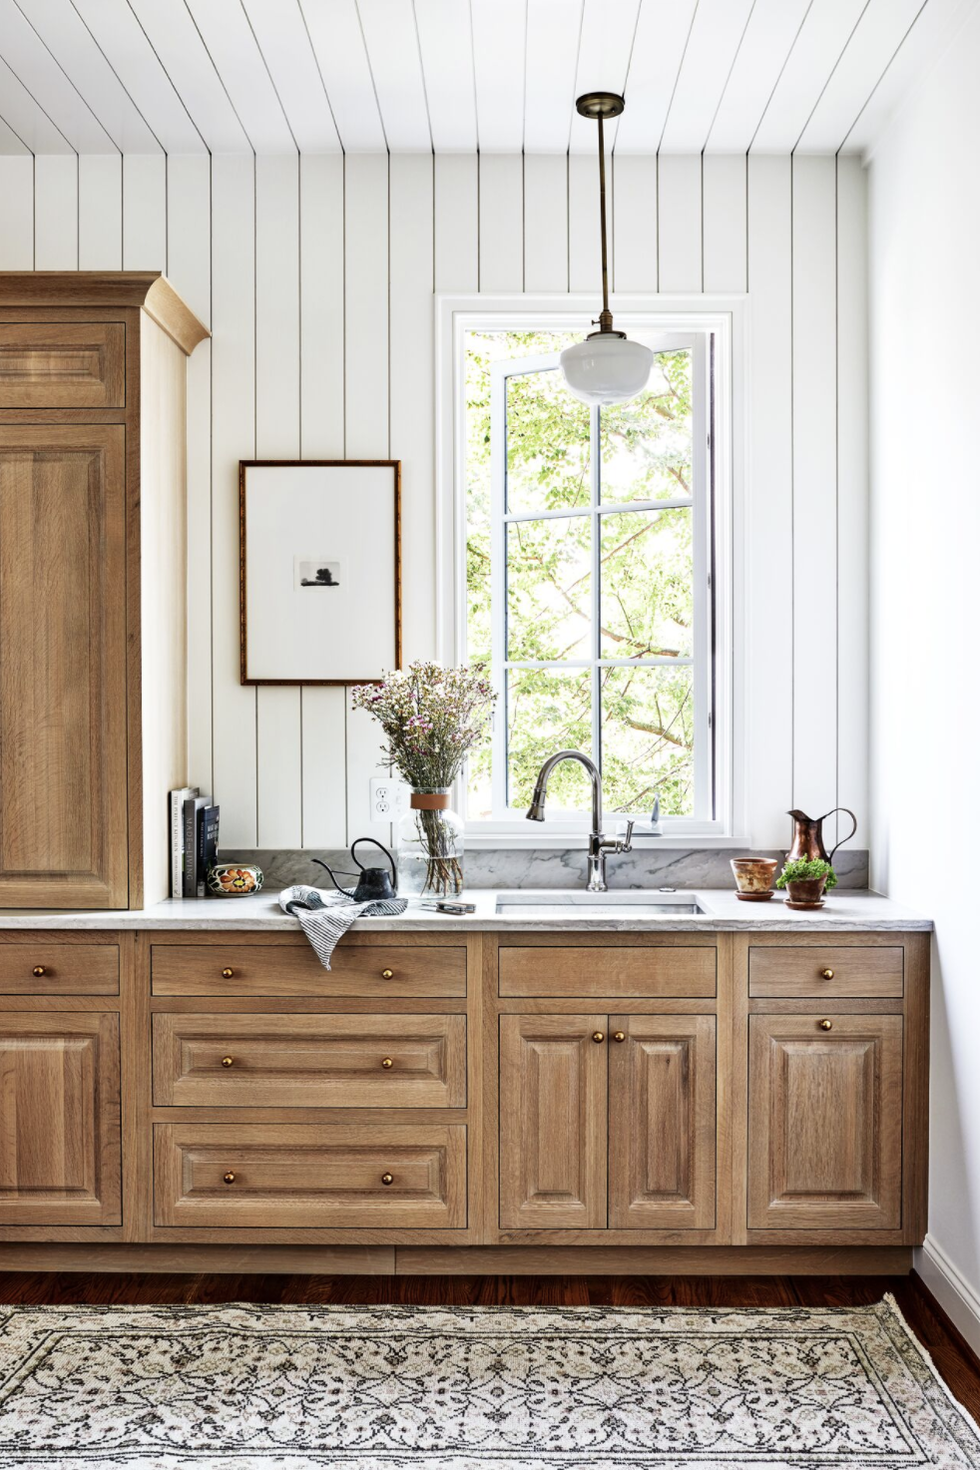 https://hips.hearstapps.com/hmg-prod/images/french-country-kitchen-ideas-stacy-zarin-goldberg-designed-by-alison-giese-interiors-and-unique-kitchens-and-baths-1649037264.png?crop=1xw:0.9899193548387096xh;center,top&resize=980:*